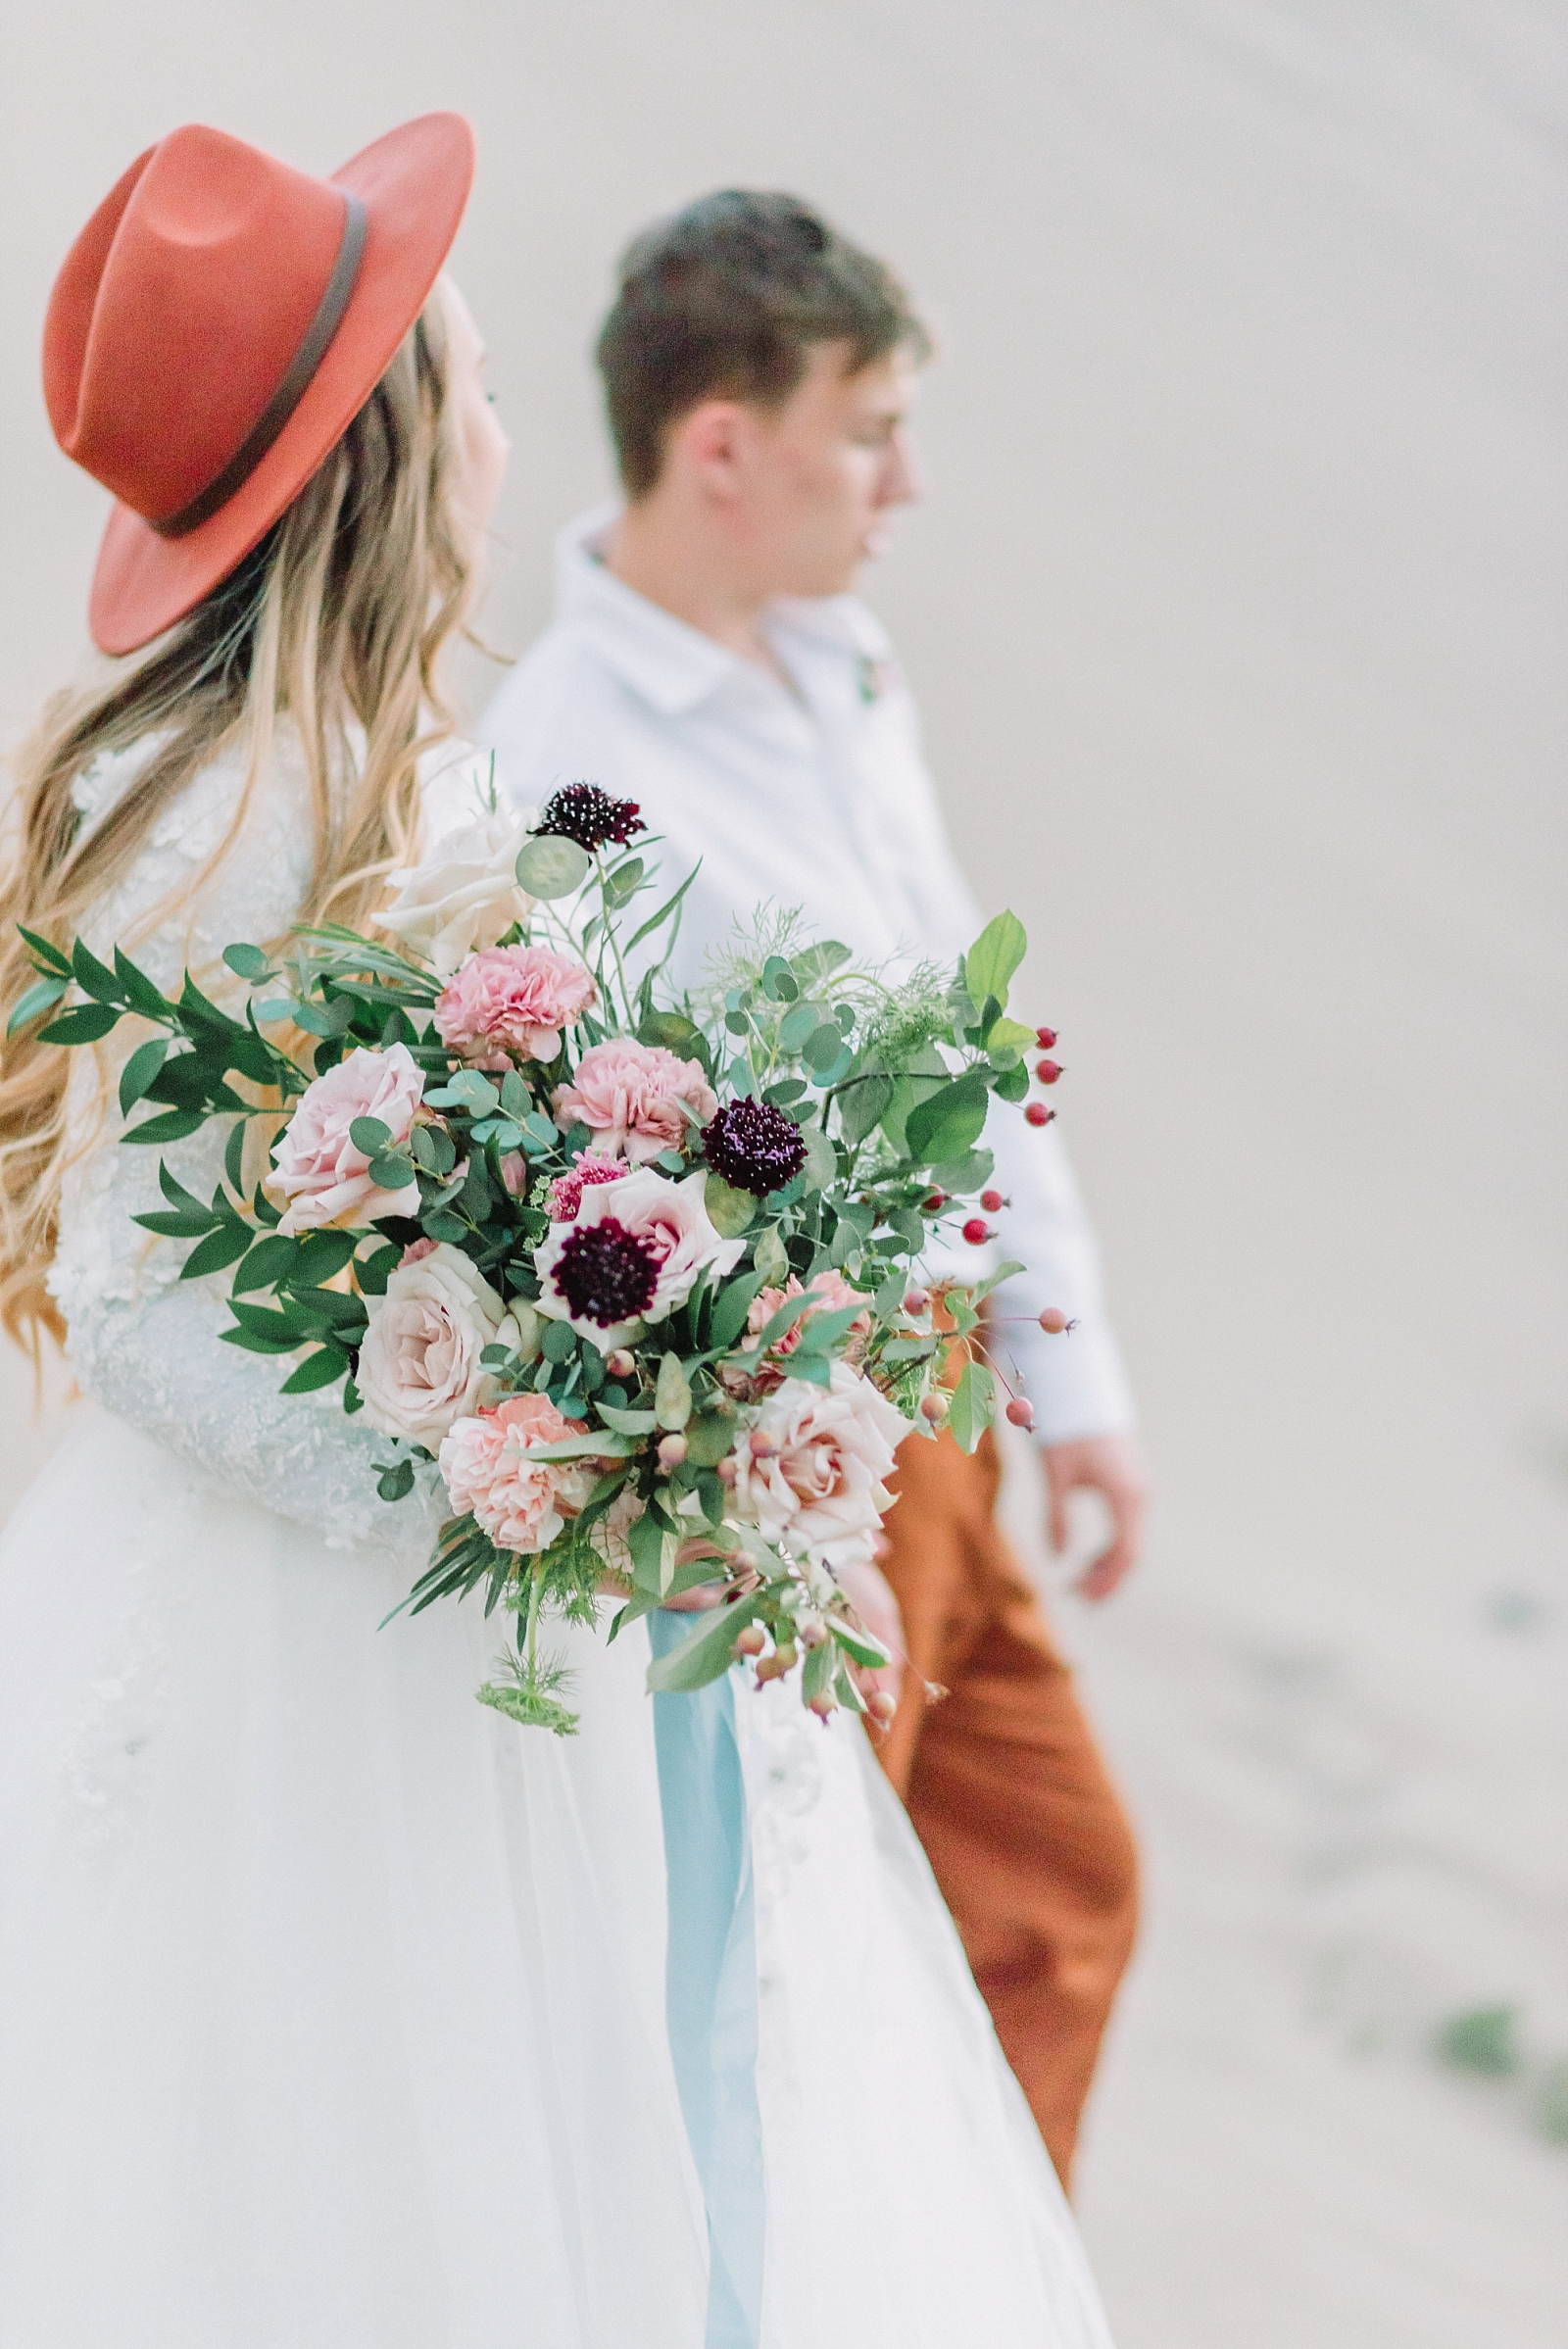 Boho chic inspired elopement with bride and groom walking together